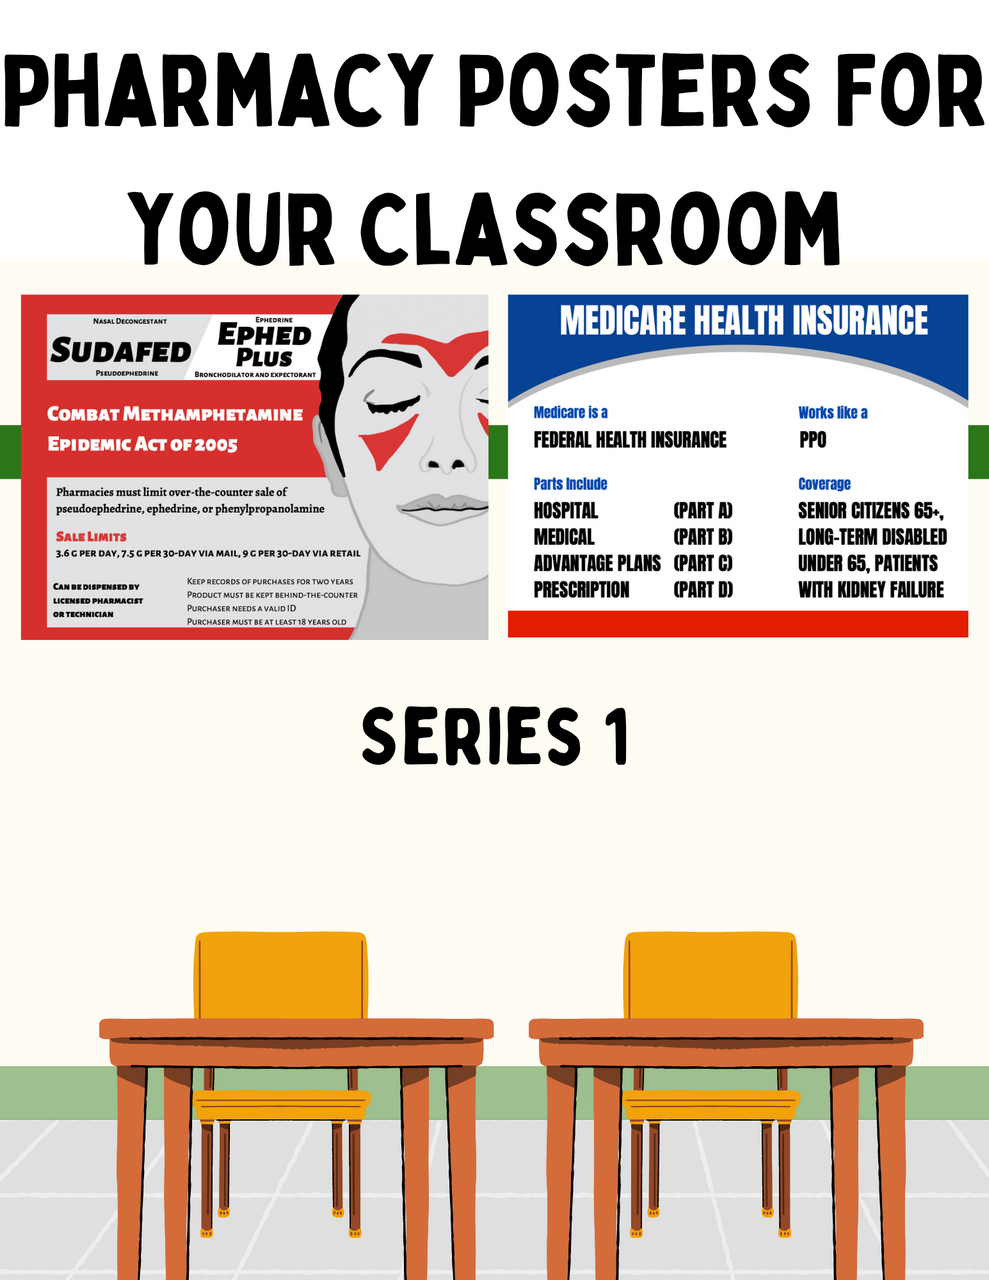 Pharmacy Themed Posters for Classroom - Series 1